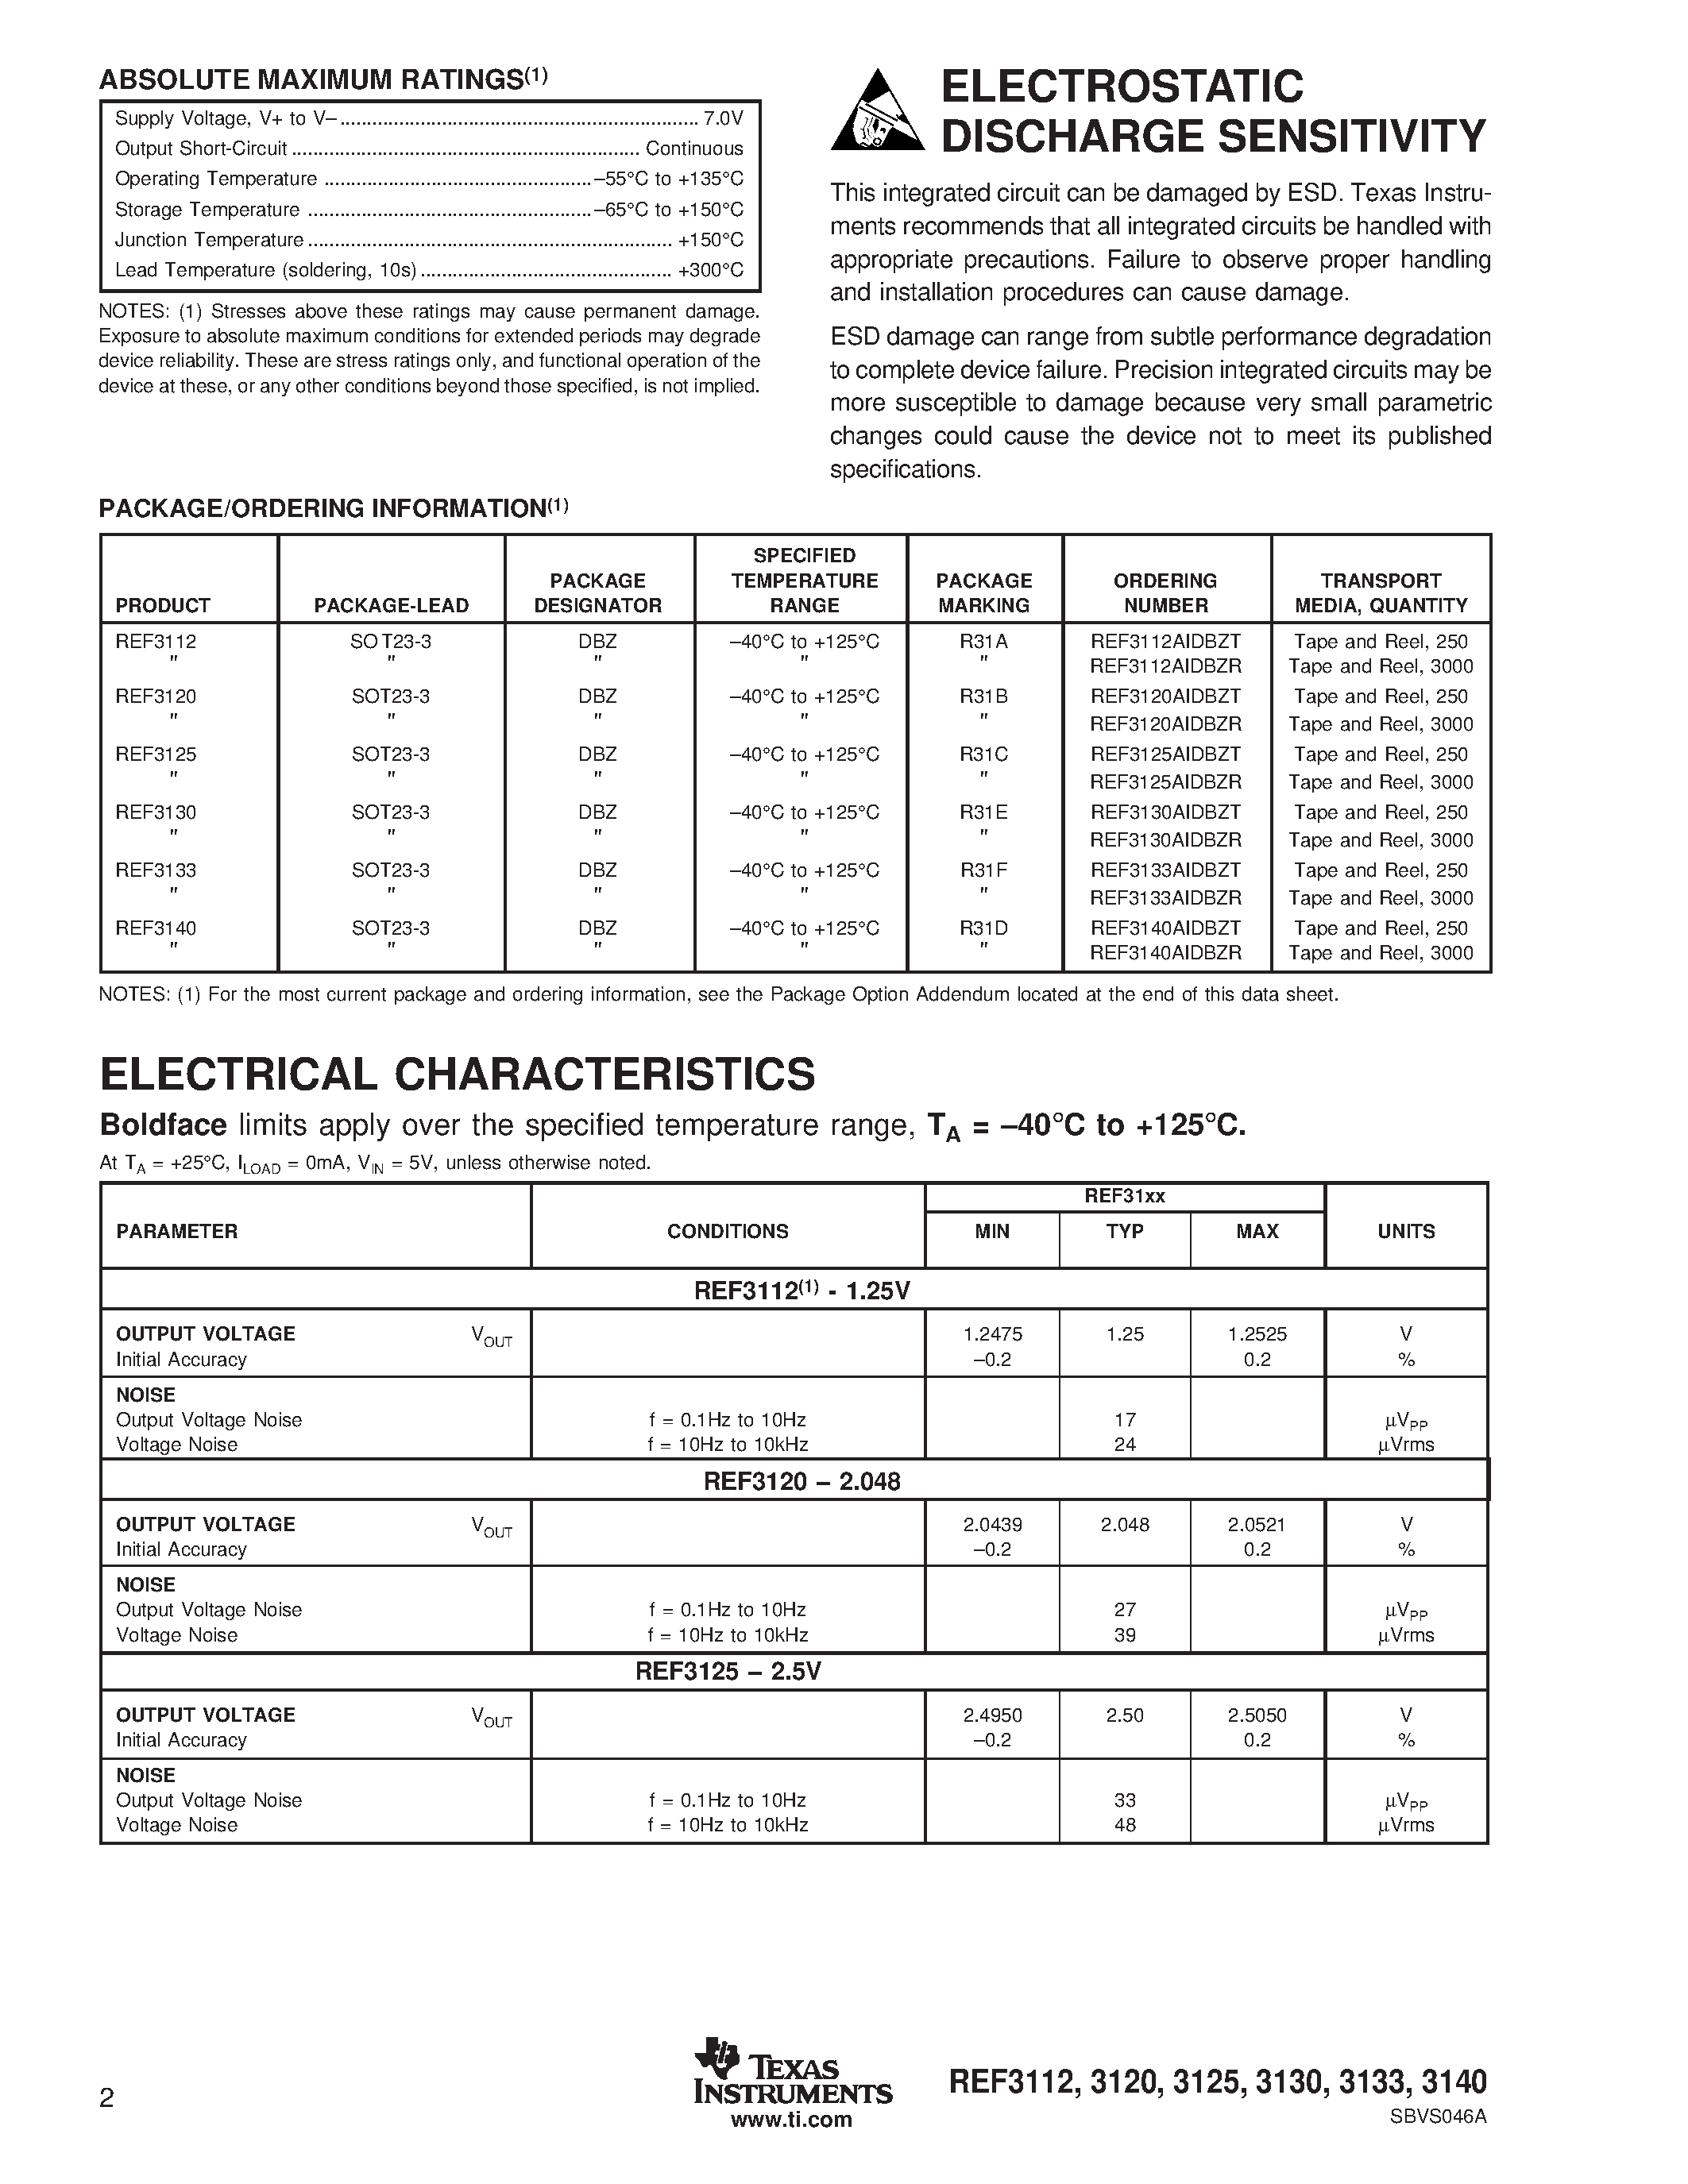 Datasheet REF3140 - 15ppm/C Max/ 100UA/ SOT23-3 SERIES VOLTAGE REFERENCE page 2